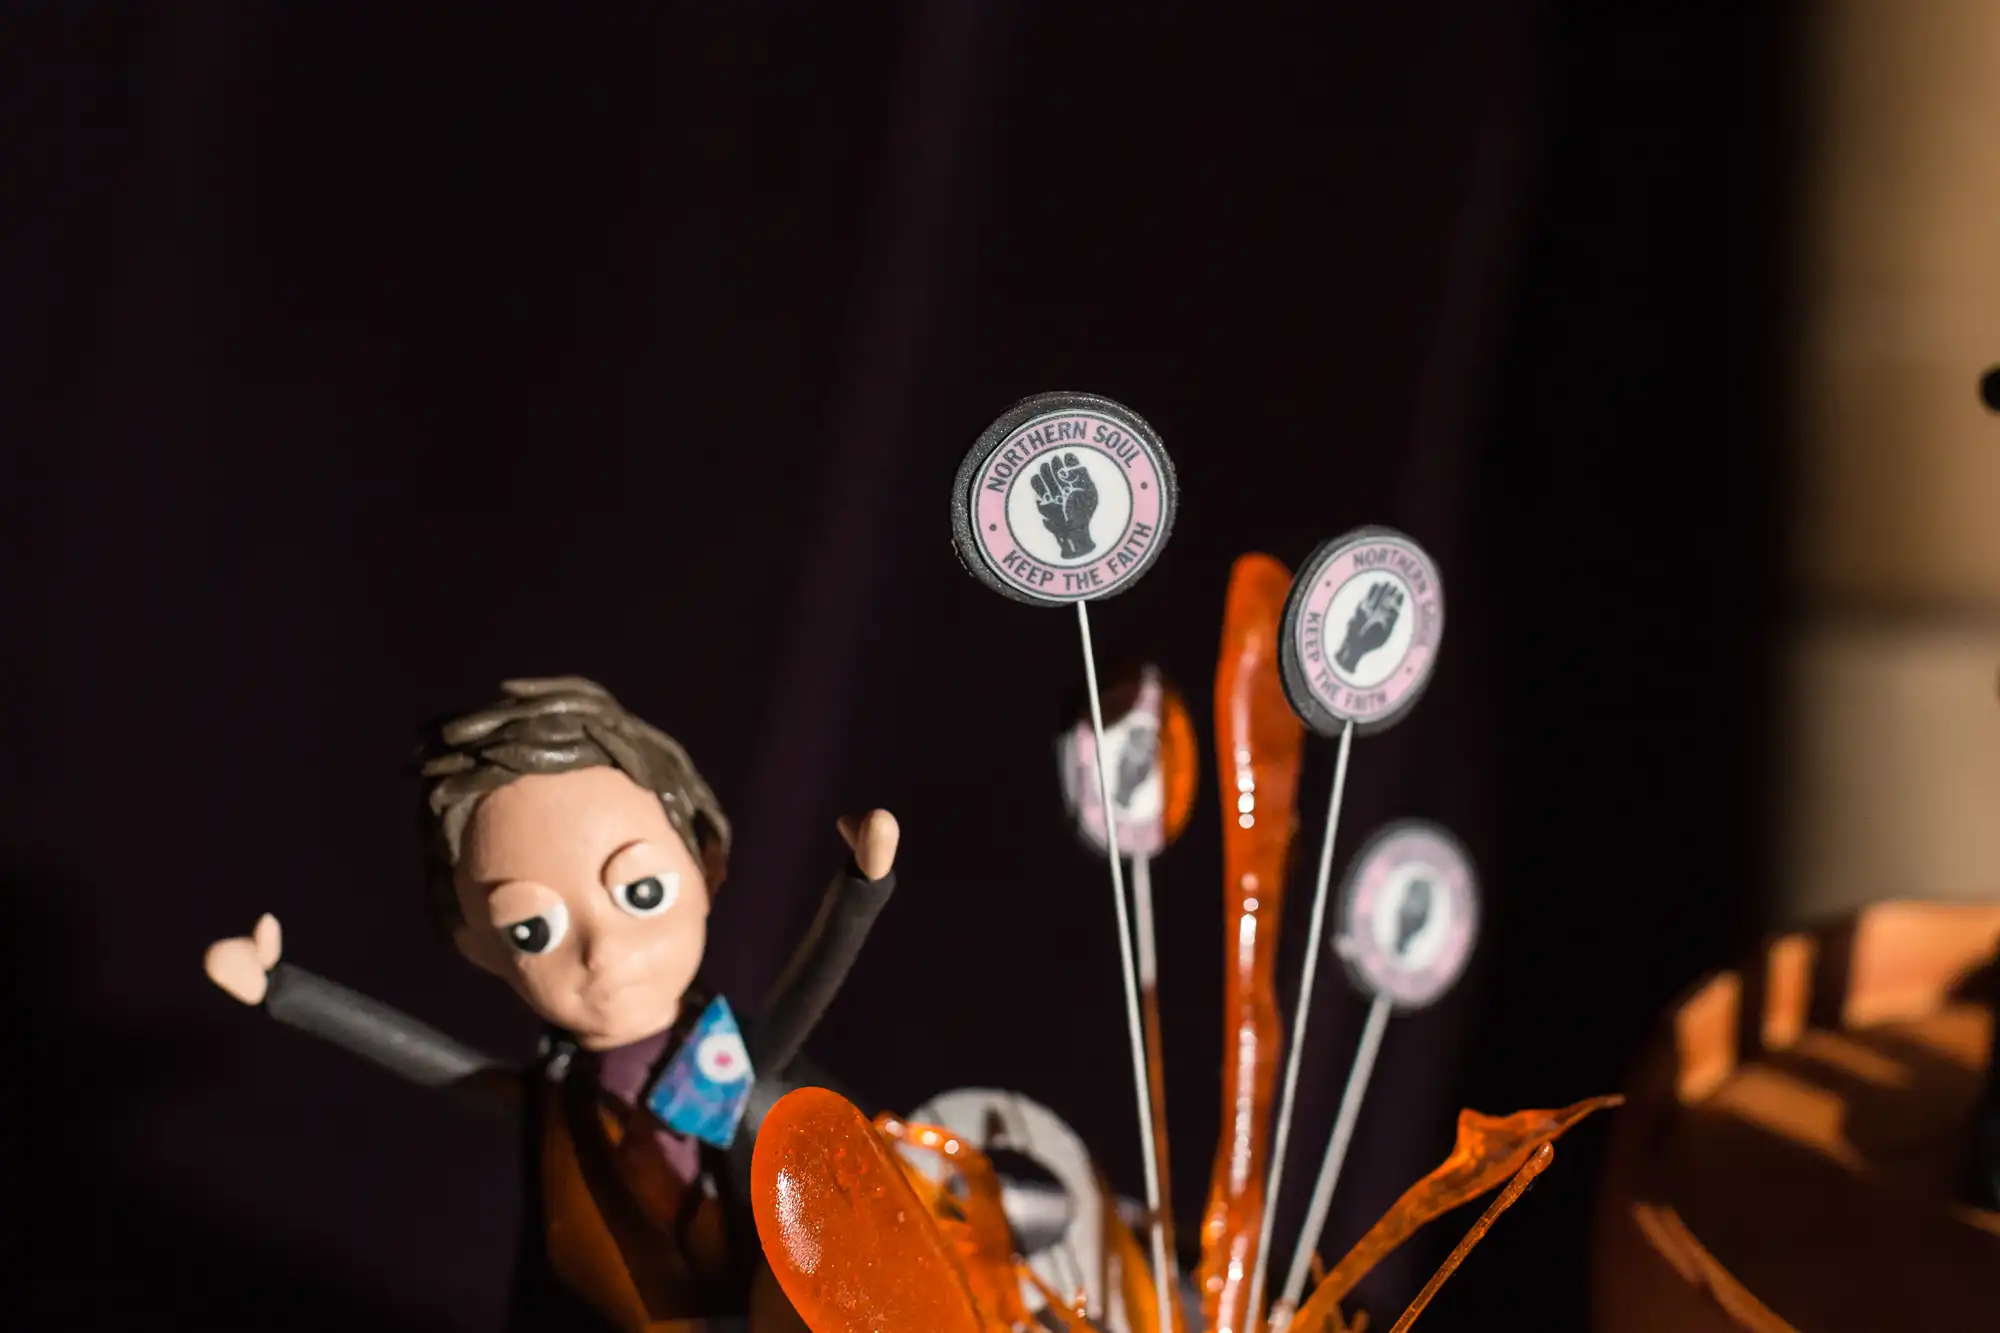 A model of a character resembling a pilot beside pinwheel-like structures with airplane cockpit instrument designs, against a blurred dark background.